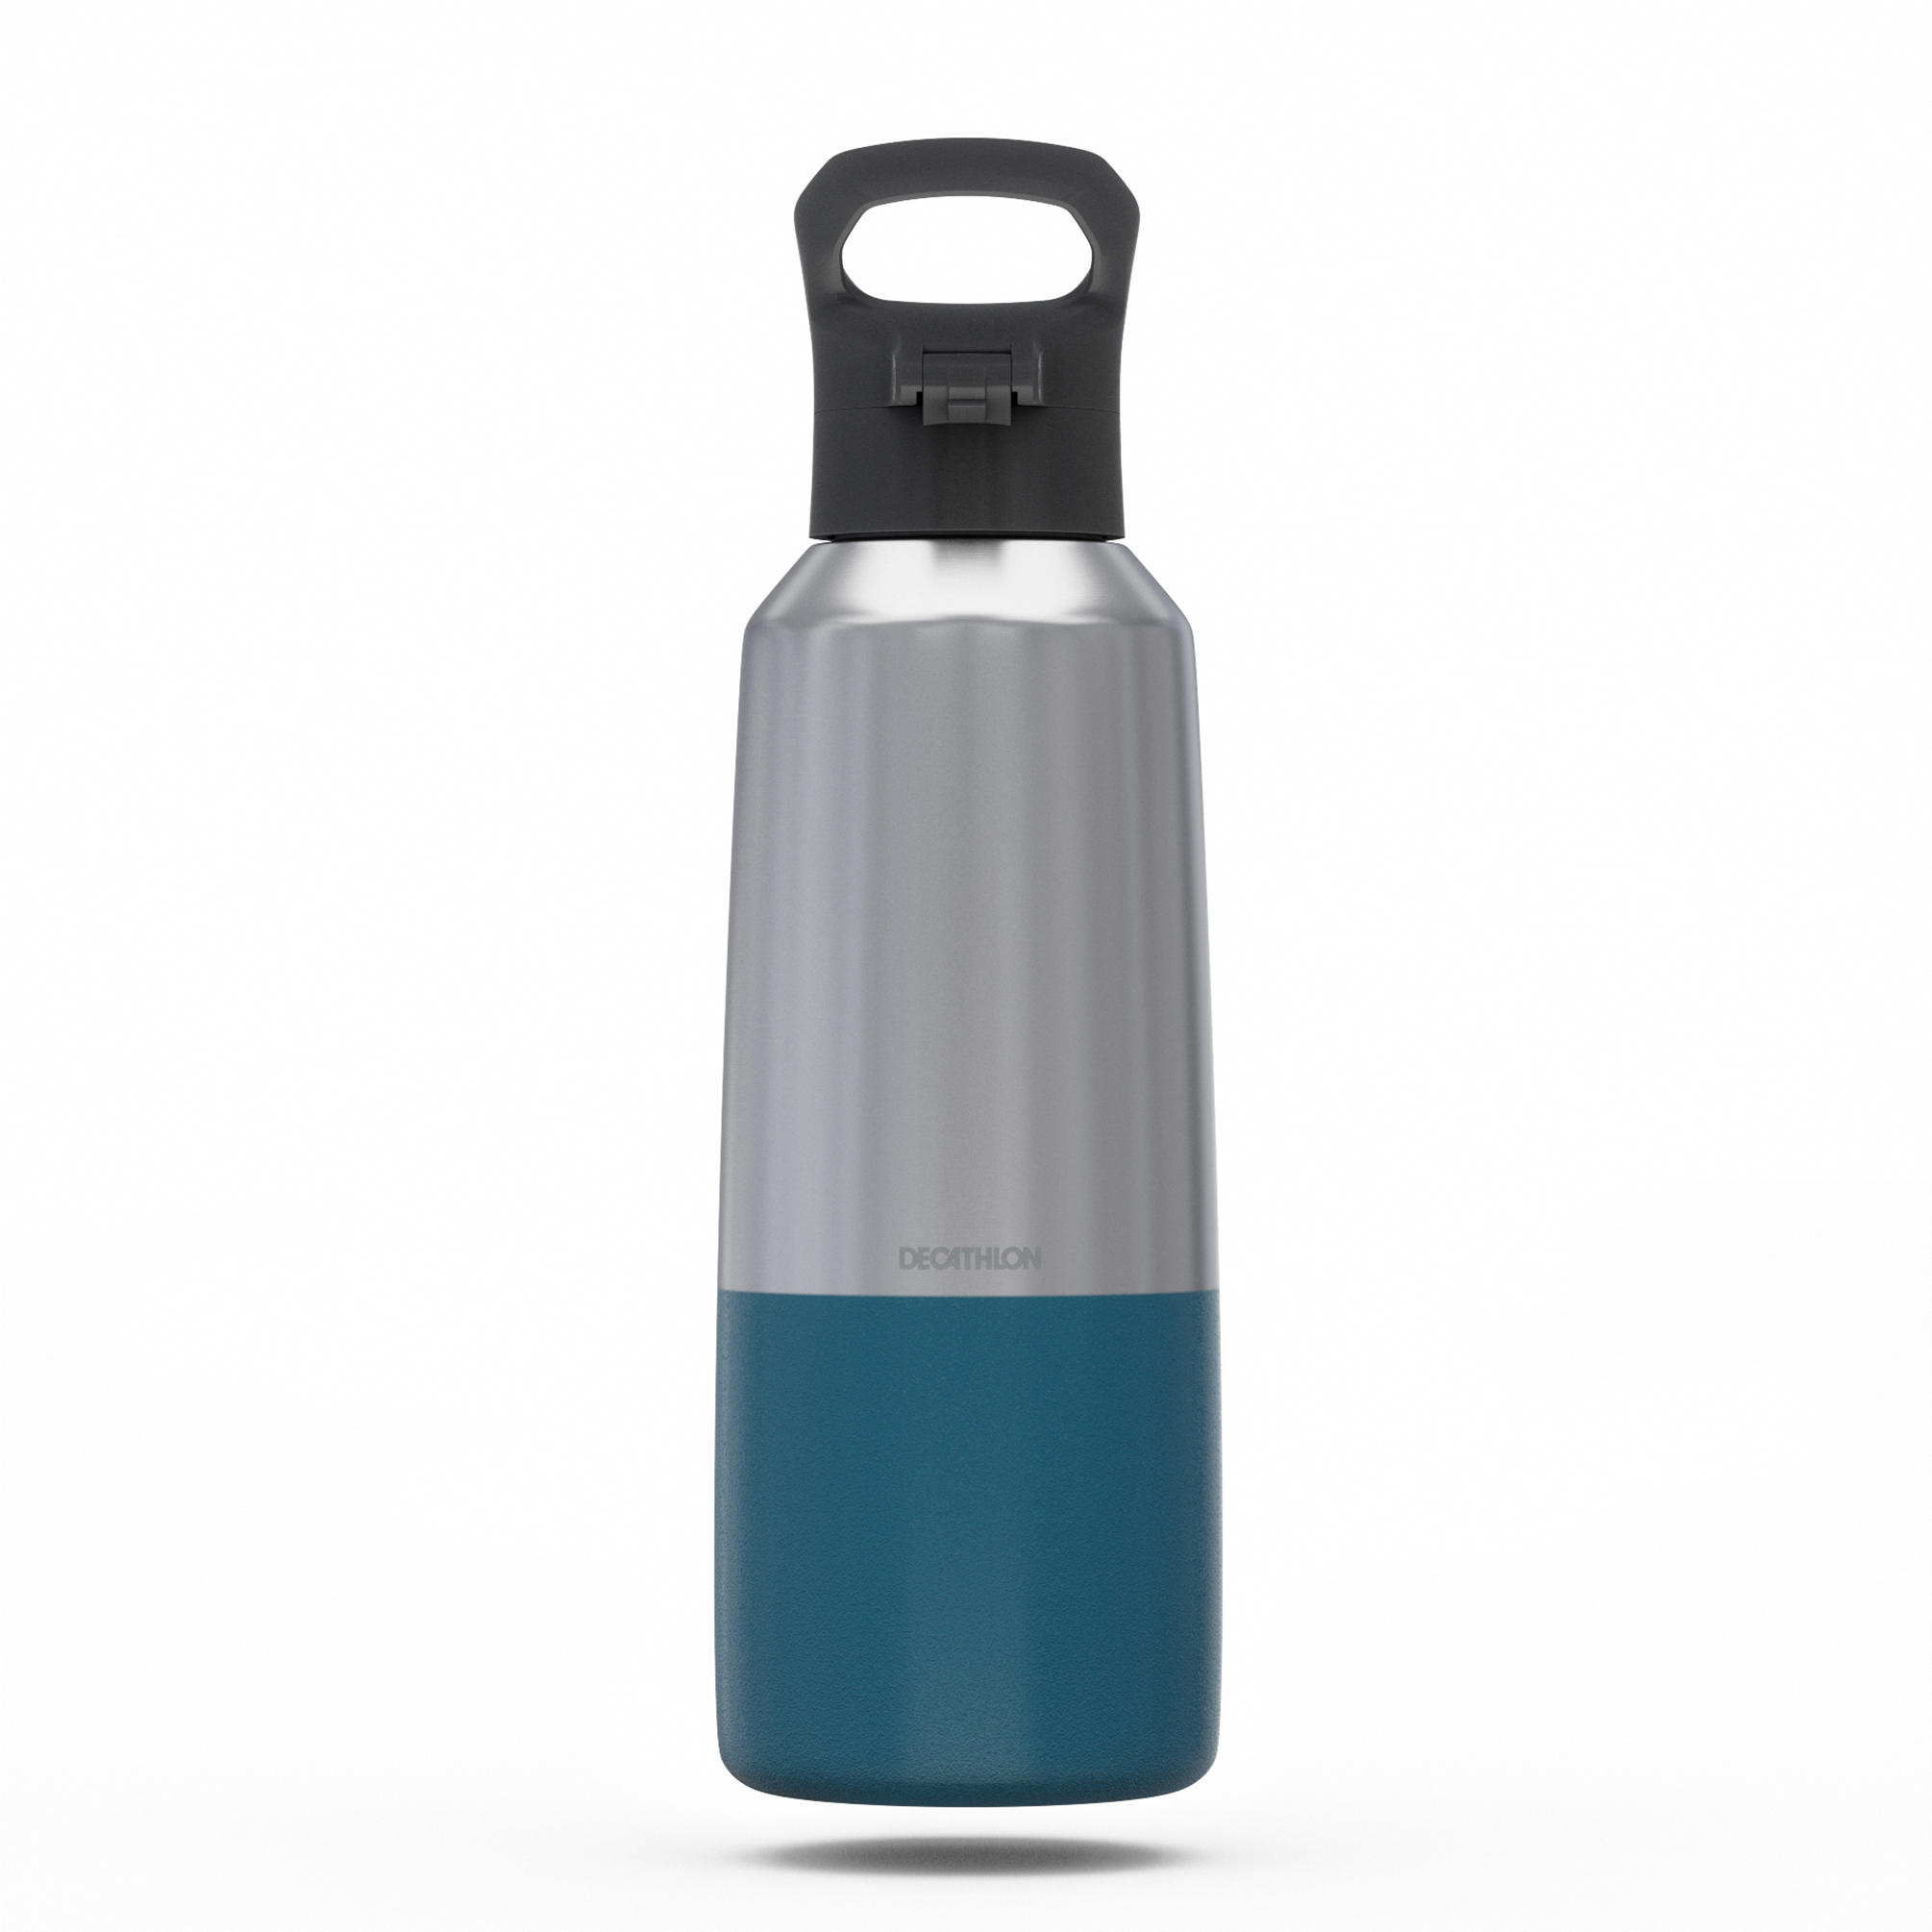 0.8 L stainless steel isothermal water bottle with quick-release cap for hiking  27/31